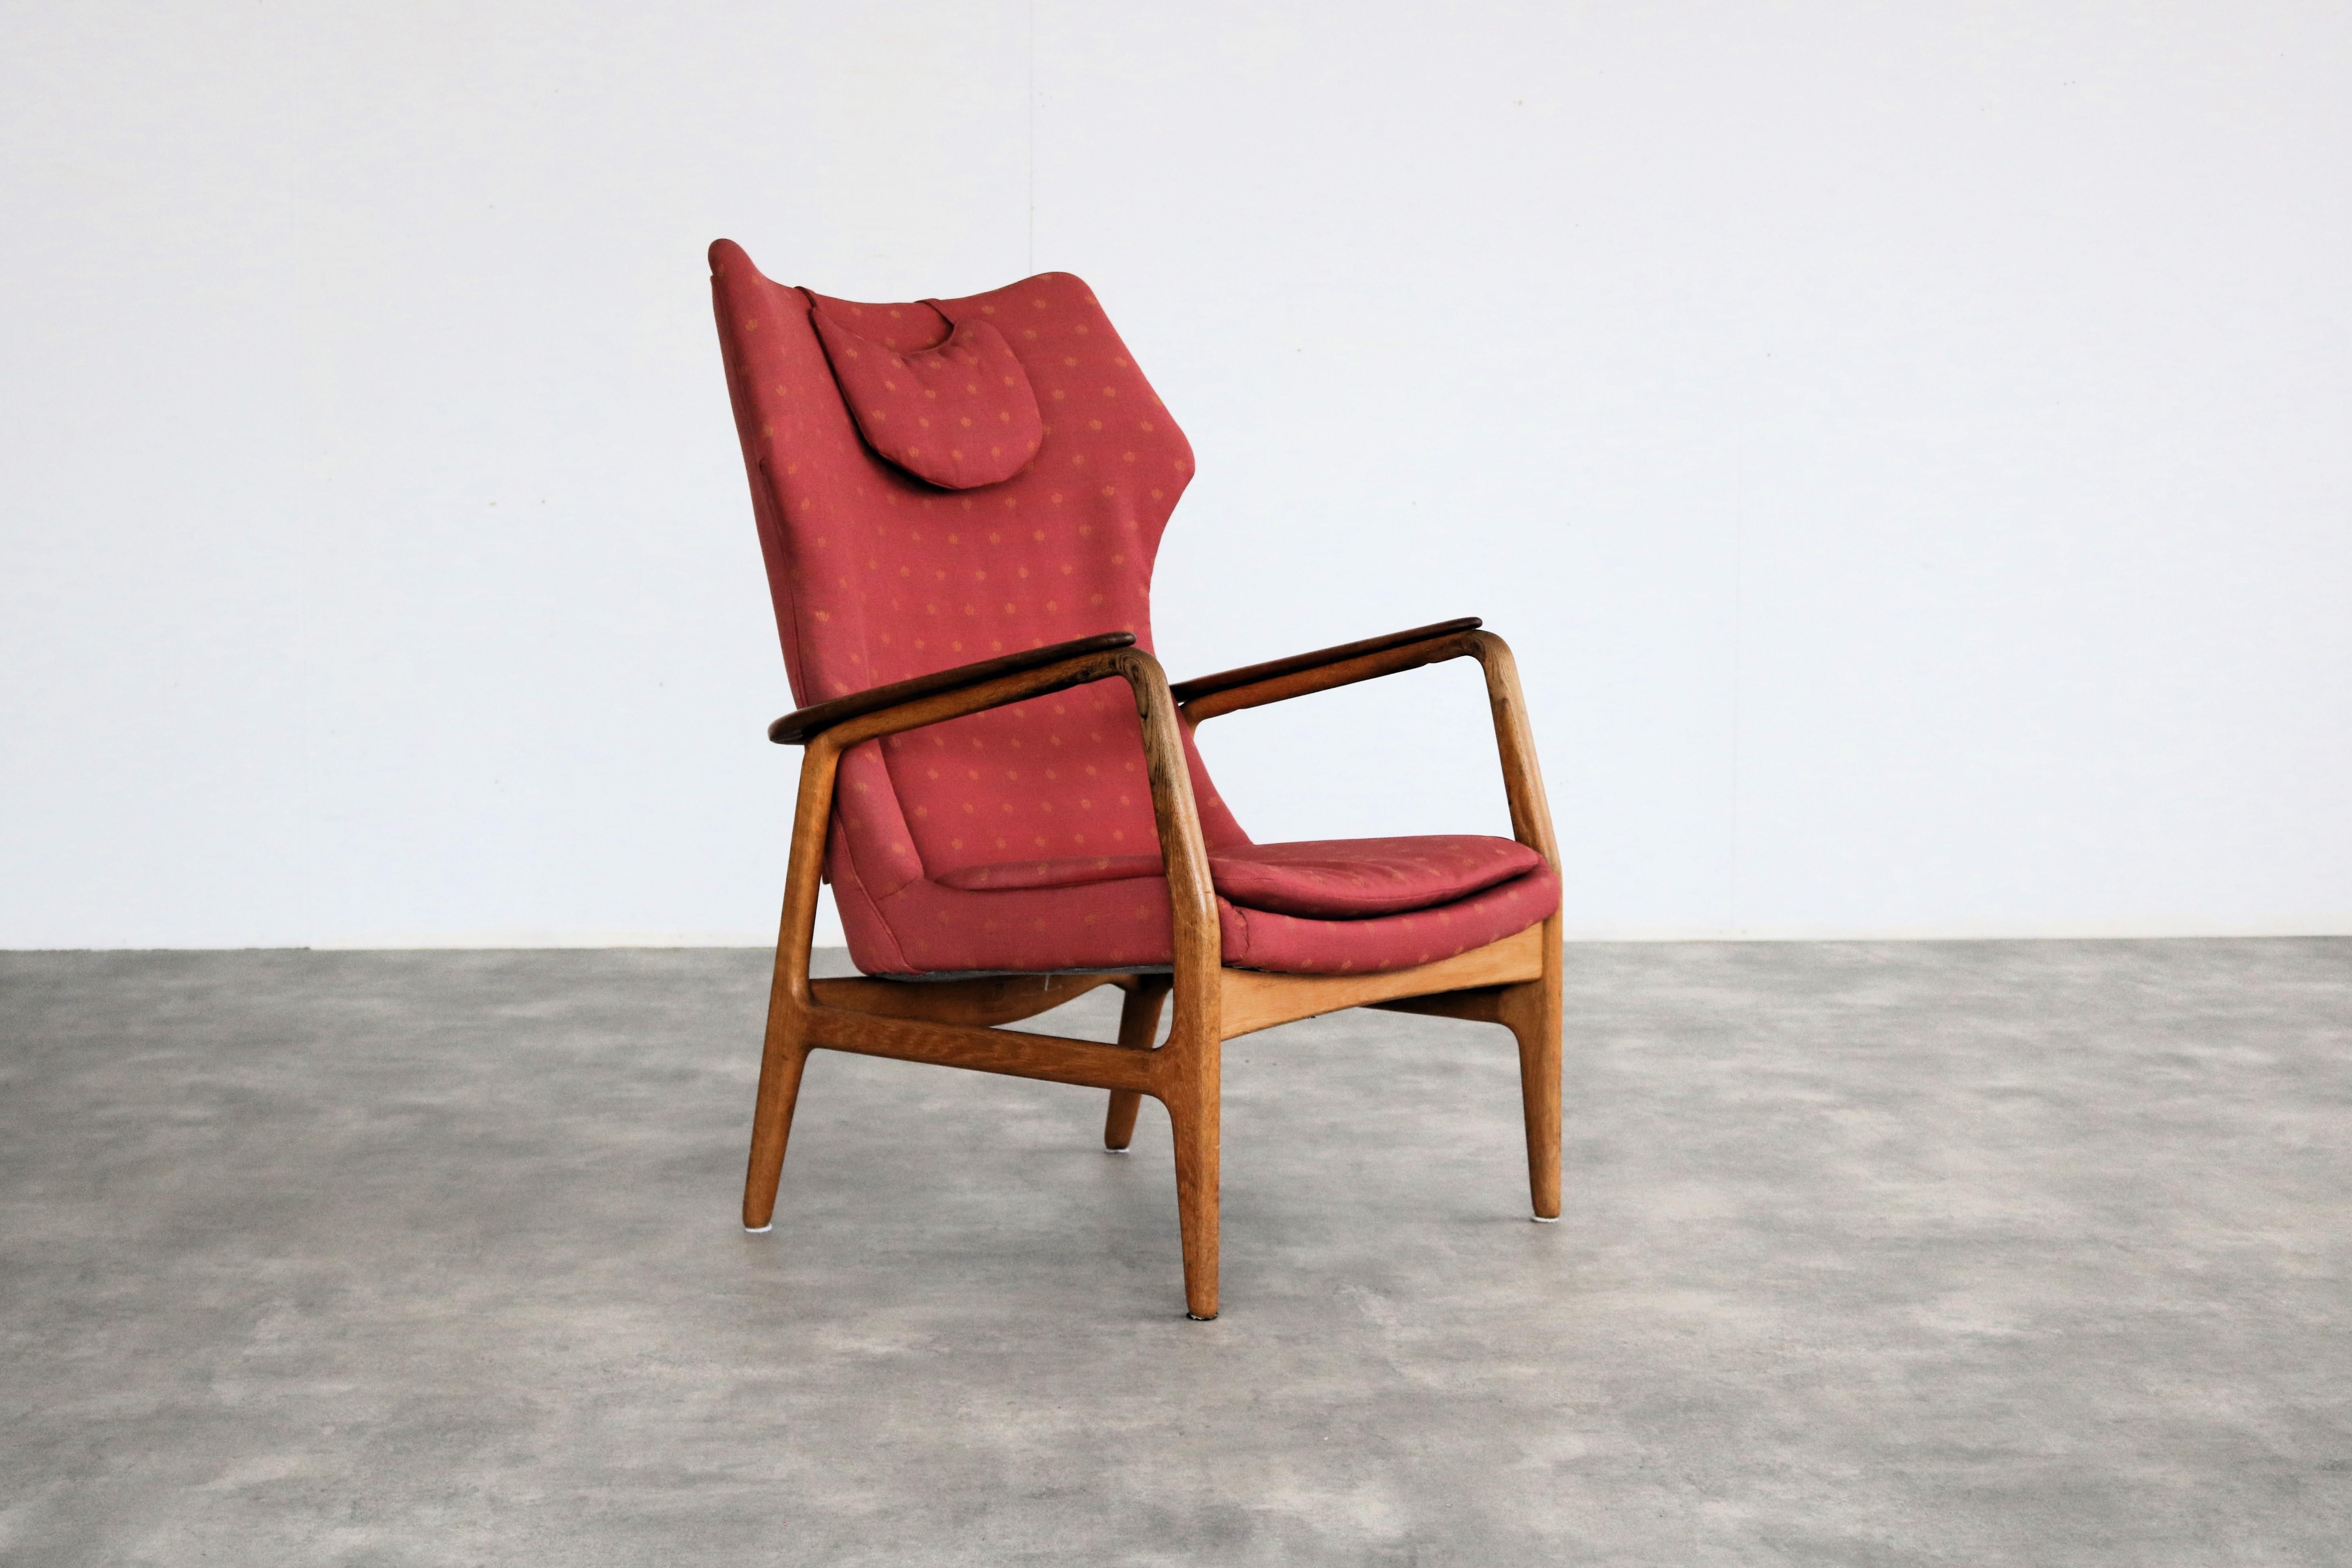 vintage Bovenkamp armchair  armchair  60's

period  60's
design  Arnold Madsen & Henry Schubell  Bovenkamp  The Netherlands
condition  good  light signs of use
size  85 x 65 x 80 (hxwxd) seat height 42 cm;

details  oak; teak; textile;

article